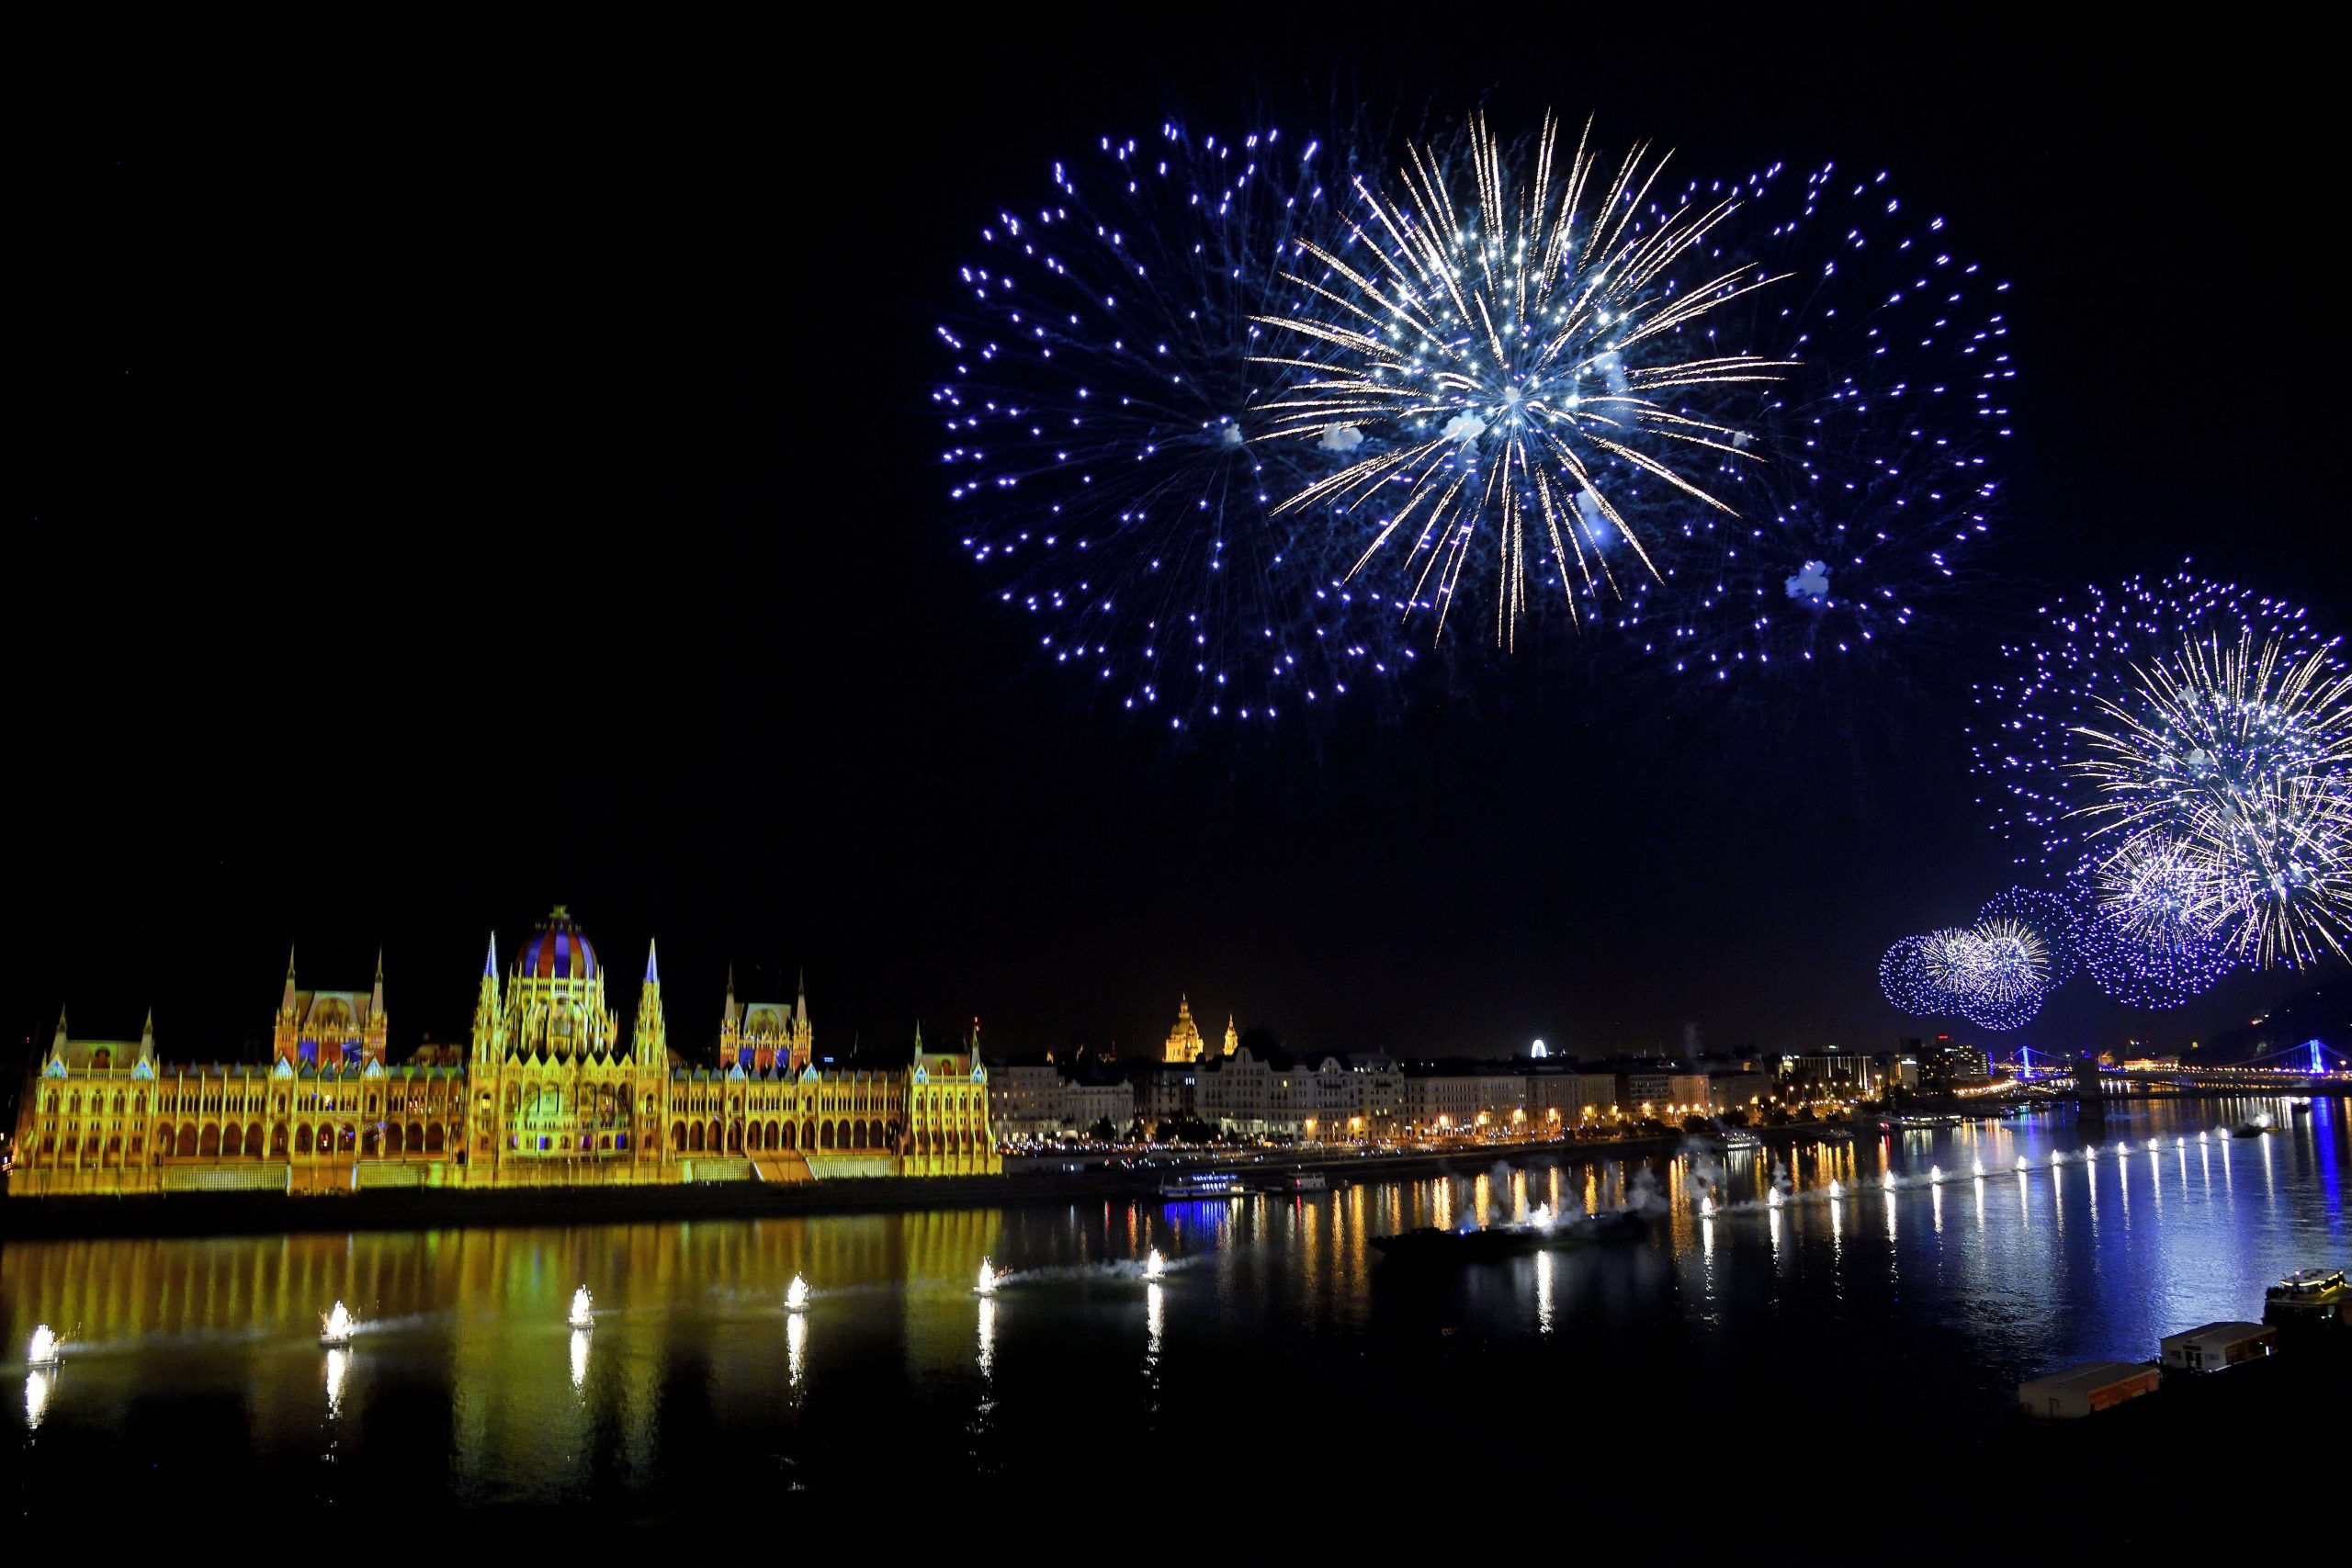 Worth the Wait! Fireworks Displays Dazzle Along the River Danube